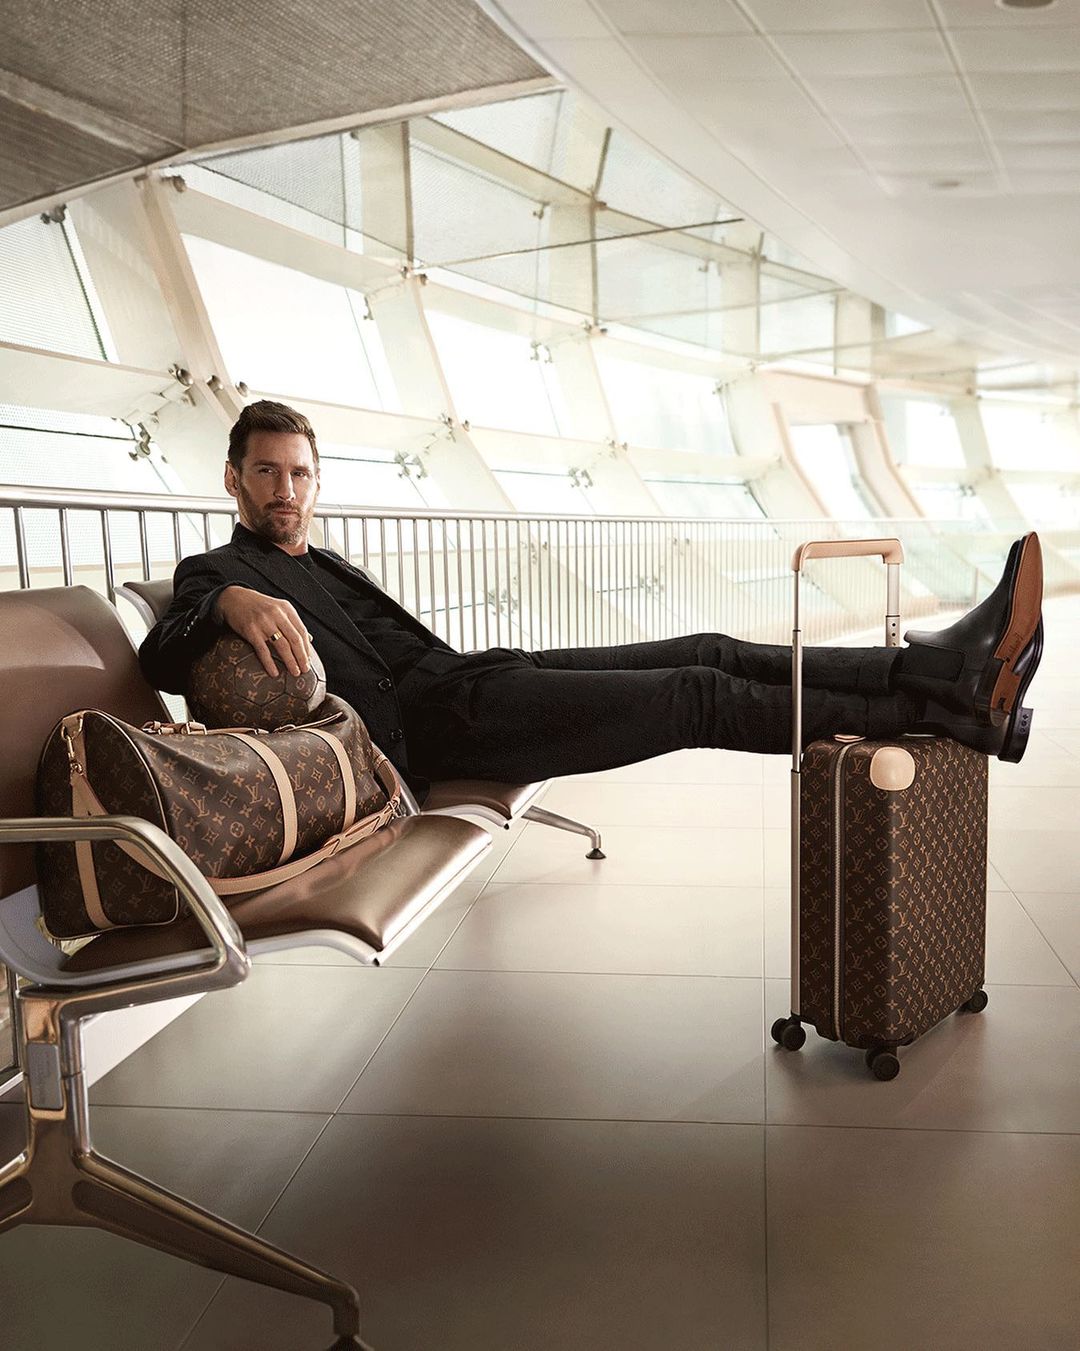 Lionel Messi for Louis Vuitton: Behind the Scenes of the New Campaign